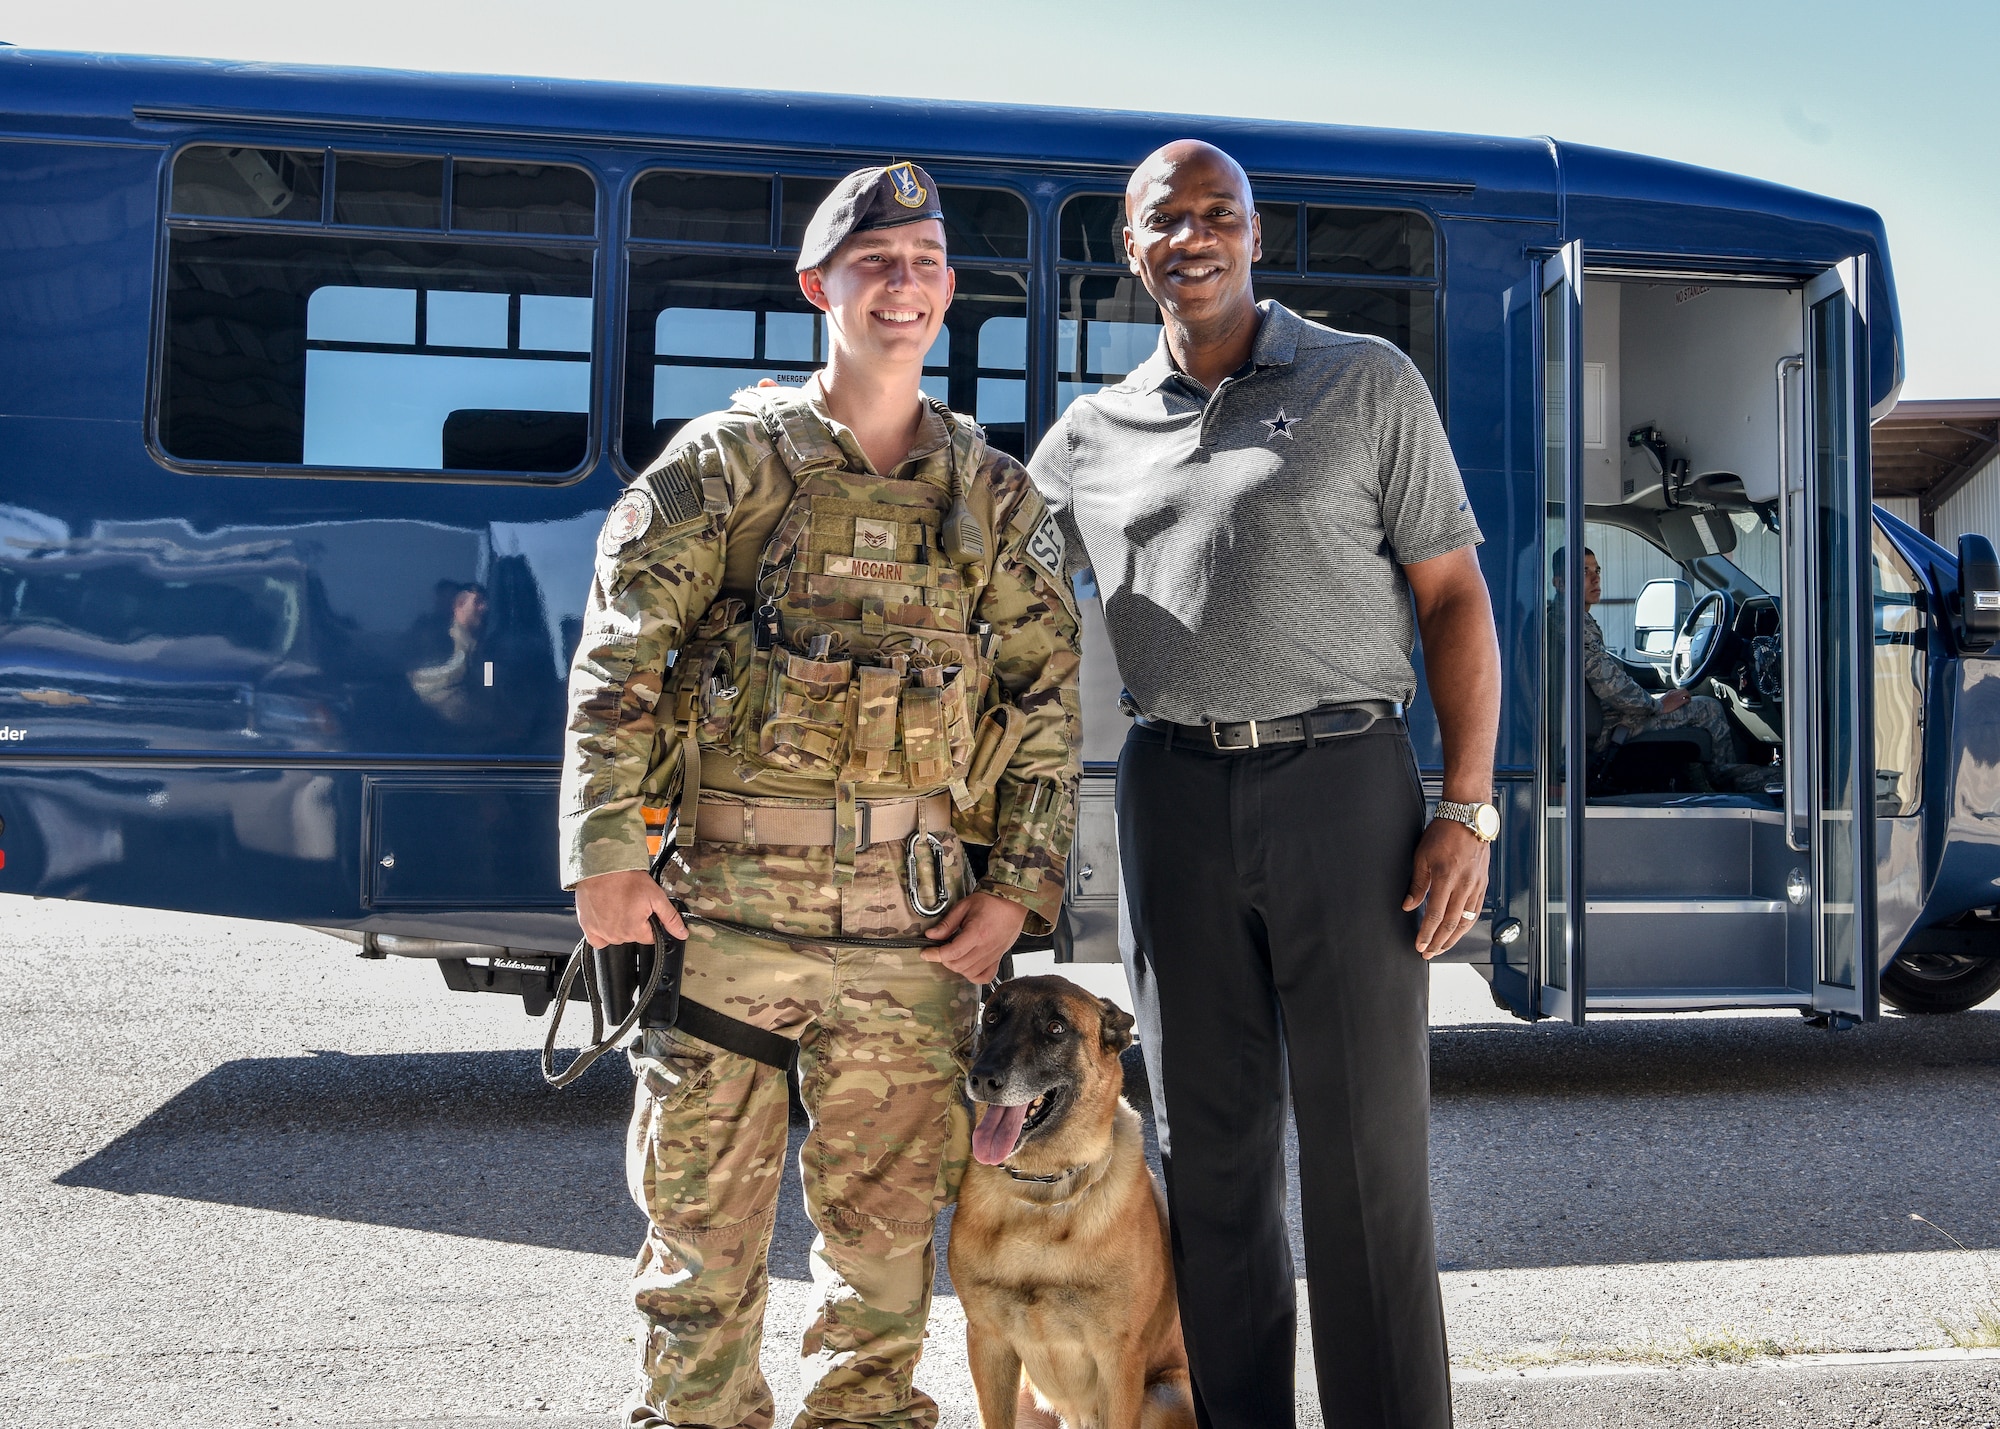 Chief Master Sgt. of the Air Force Kaleth O. Wright poses for a photo with Staff Sgt. Blake McCarn, 377th Security Forces Squadron Military Working Dog handler and Garbo, 377th SFS MWD at Kirtland Air Force Base, N.M., Sept. 28, 2019. Wright spent two days at Kirtland visiting with Airmen, learning their stories and how they contribute to the many missions carried out at Kirtland. (U.S. Air Force photo by Airman 1st Class Austin J. Prisbrey)